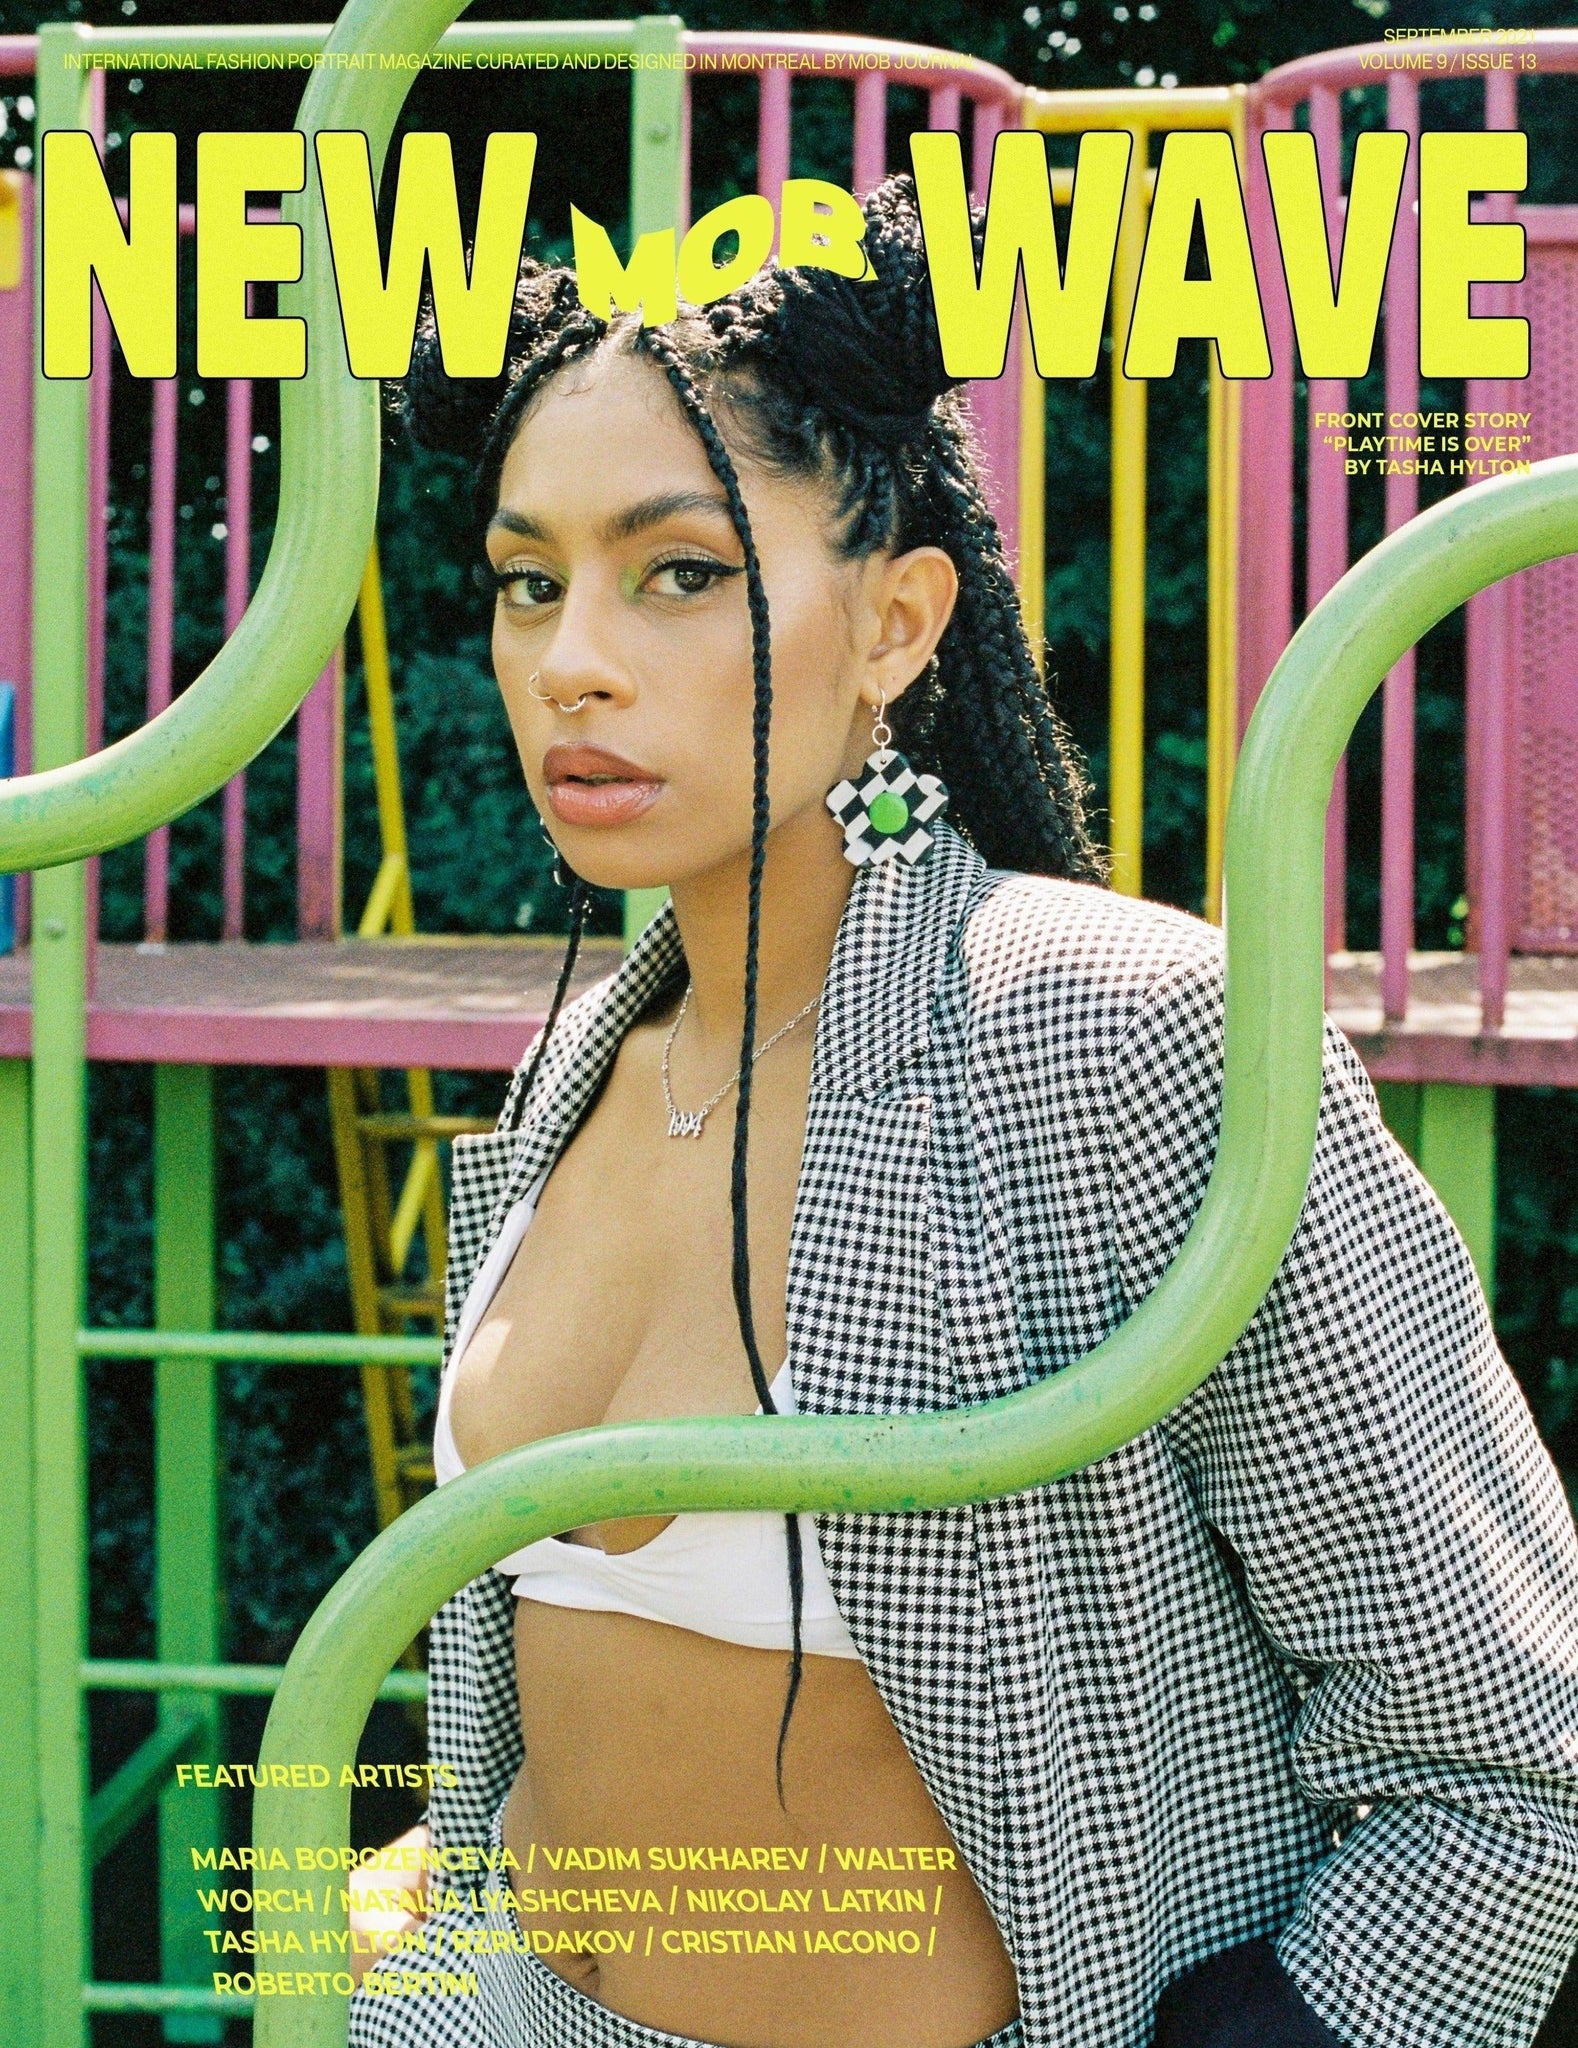 NEW WAVE | VOLUME NINE | ISSUE #13 - Mob Journal